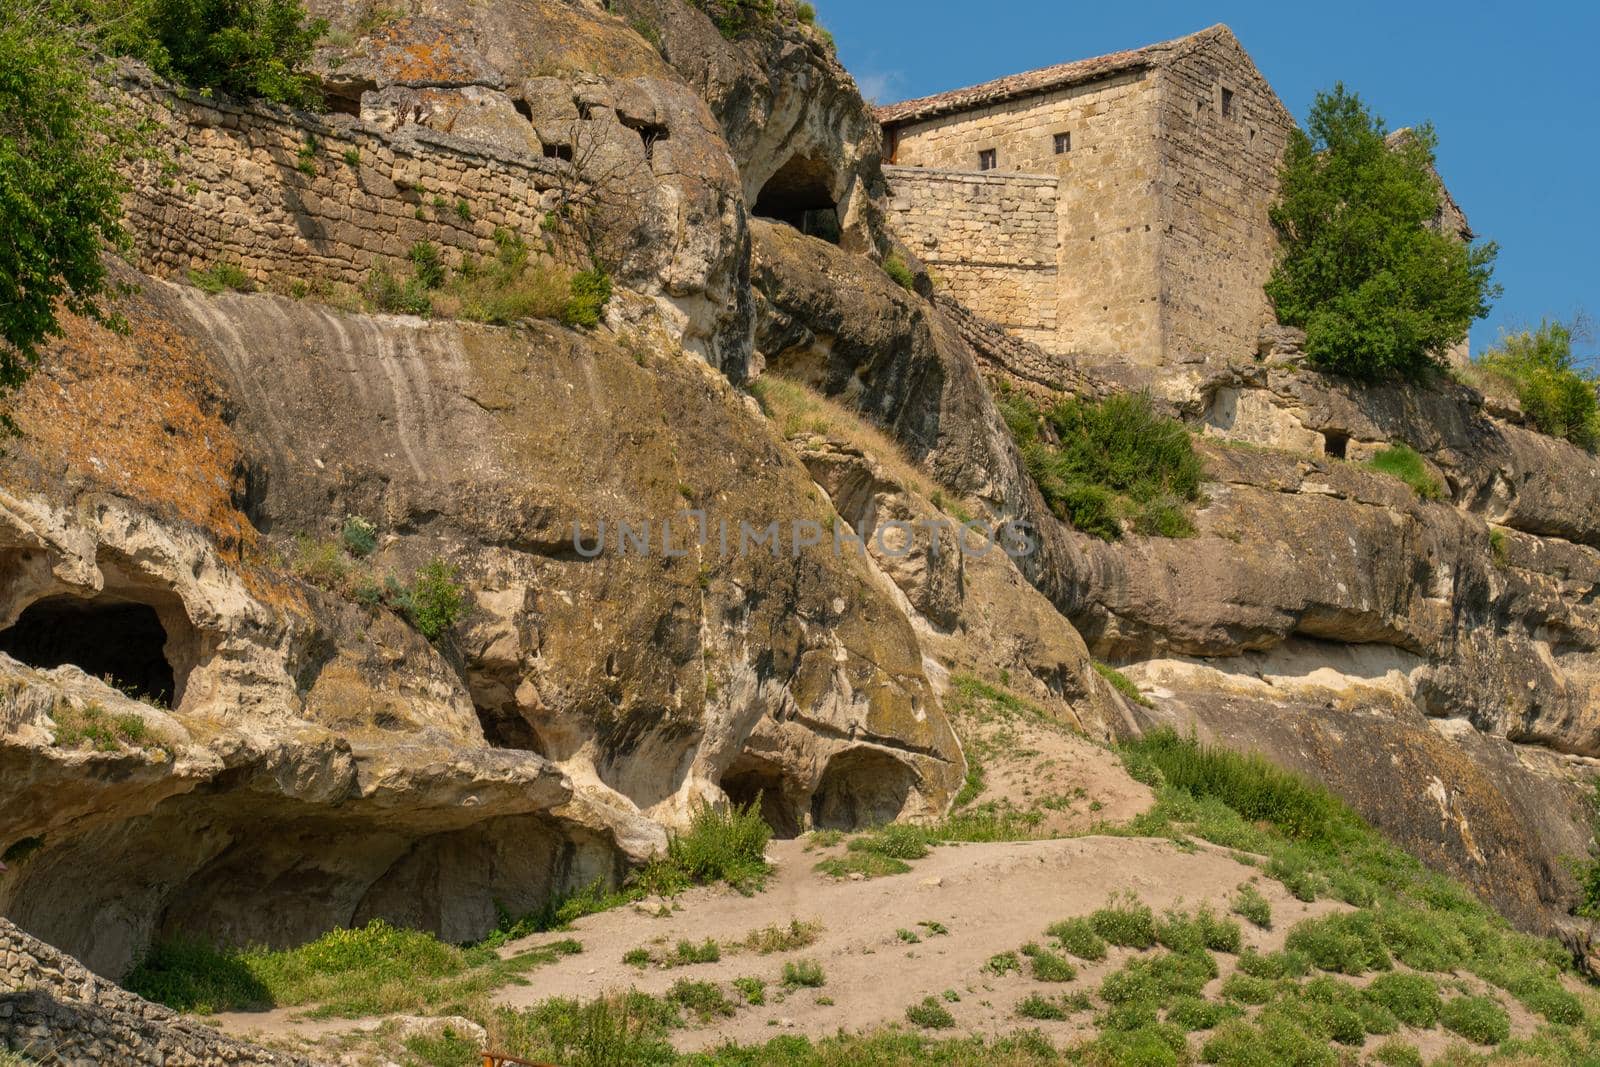 Ancient cave city road bakhchisaray chufut crimea medieval street stone, concept landscape building for tourism from rock cloudy, limestone karaite. Town ruins stony, by 89167702191